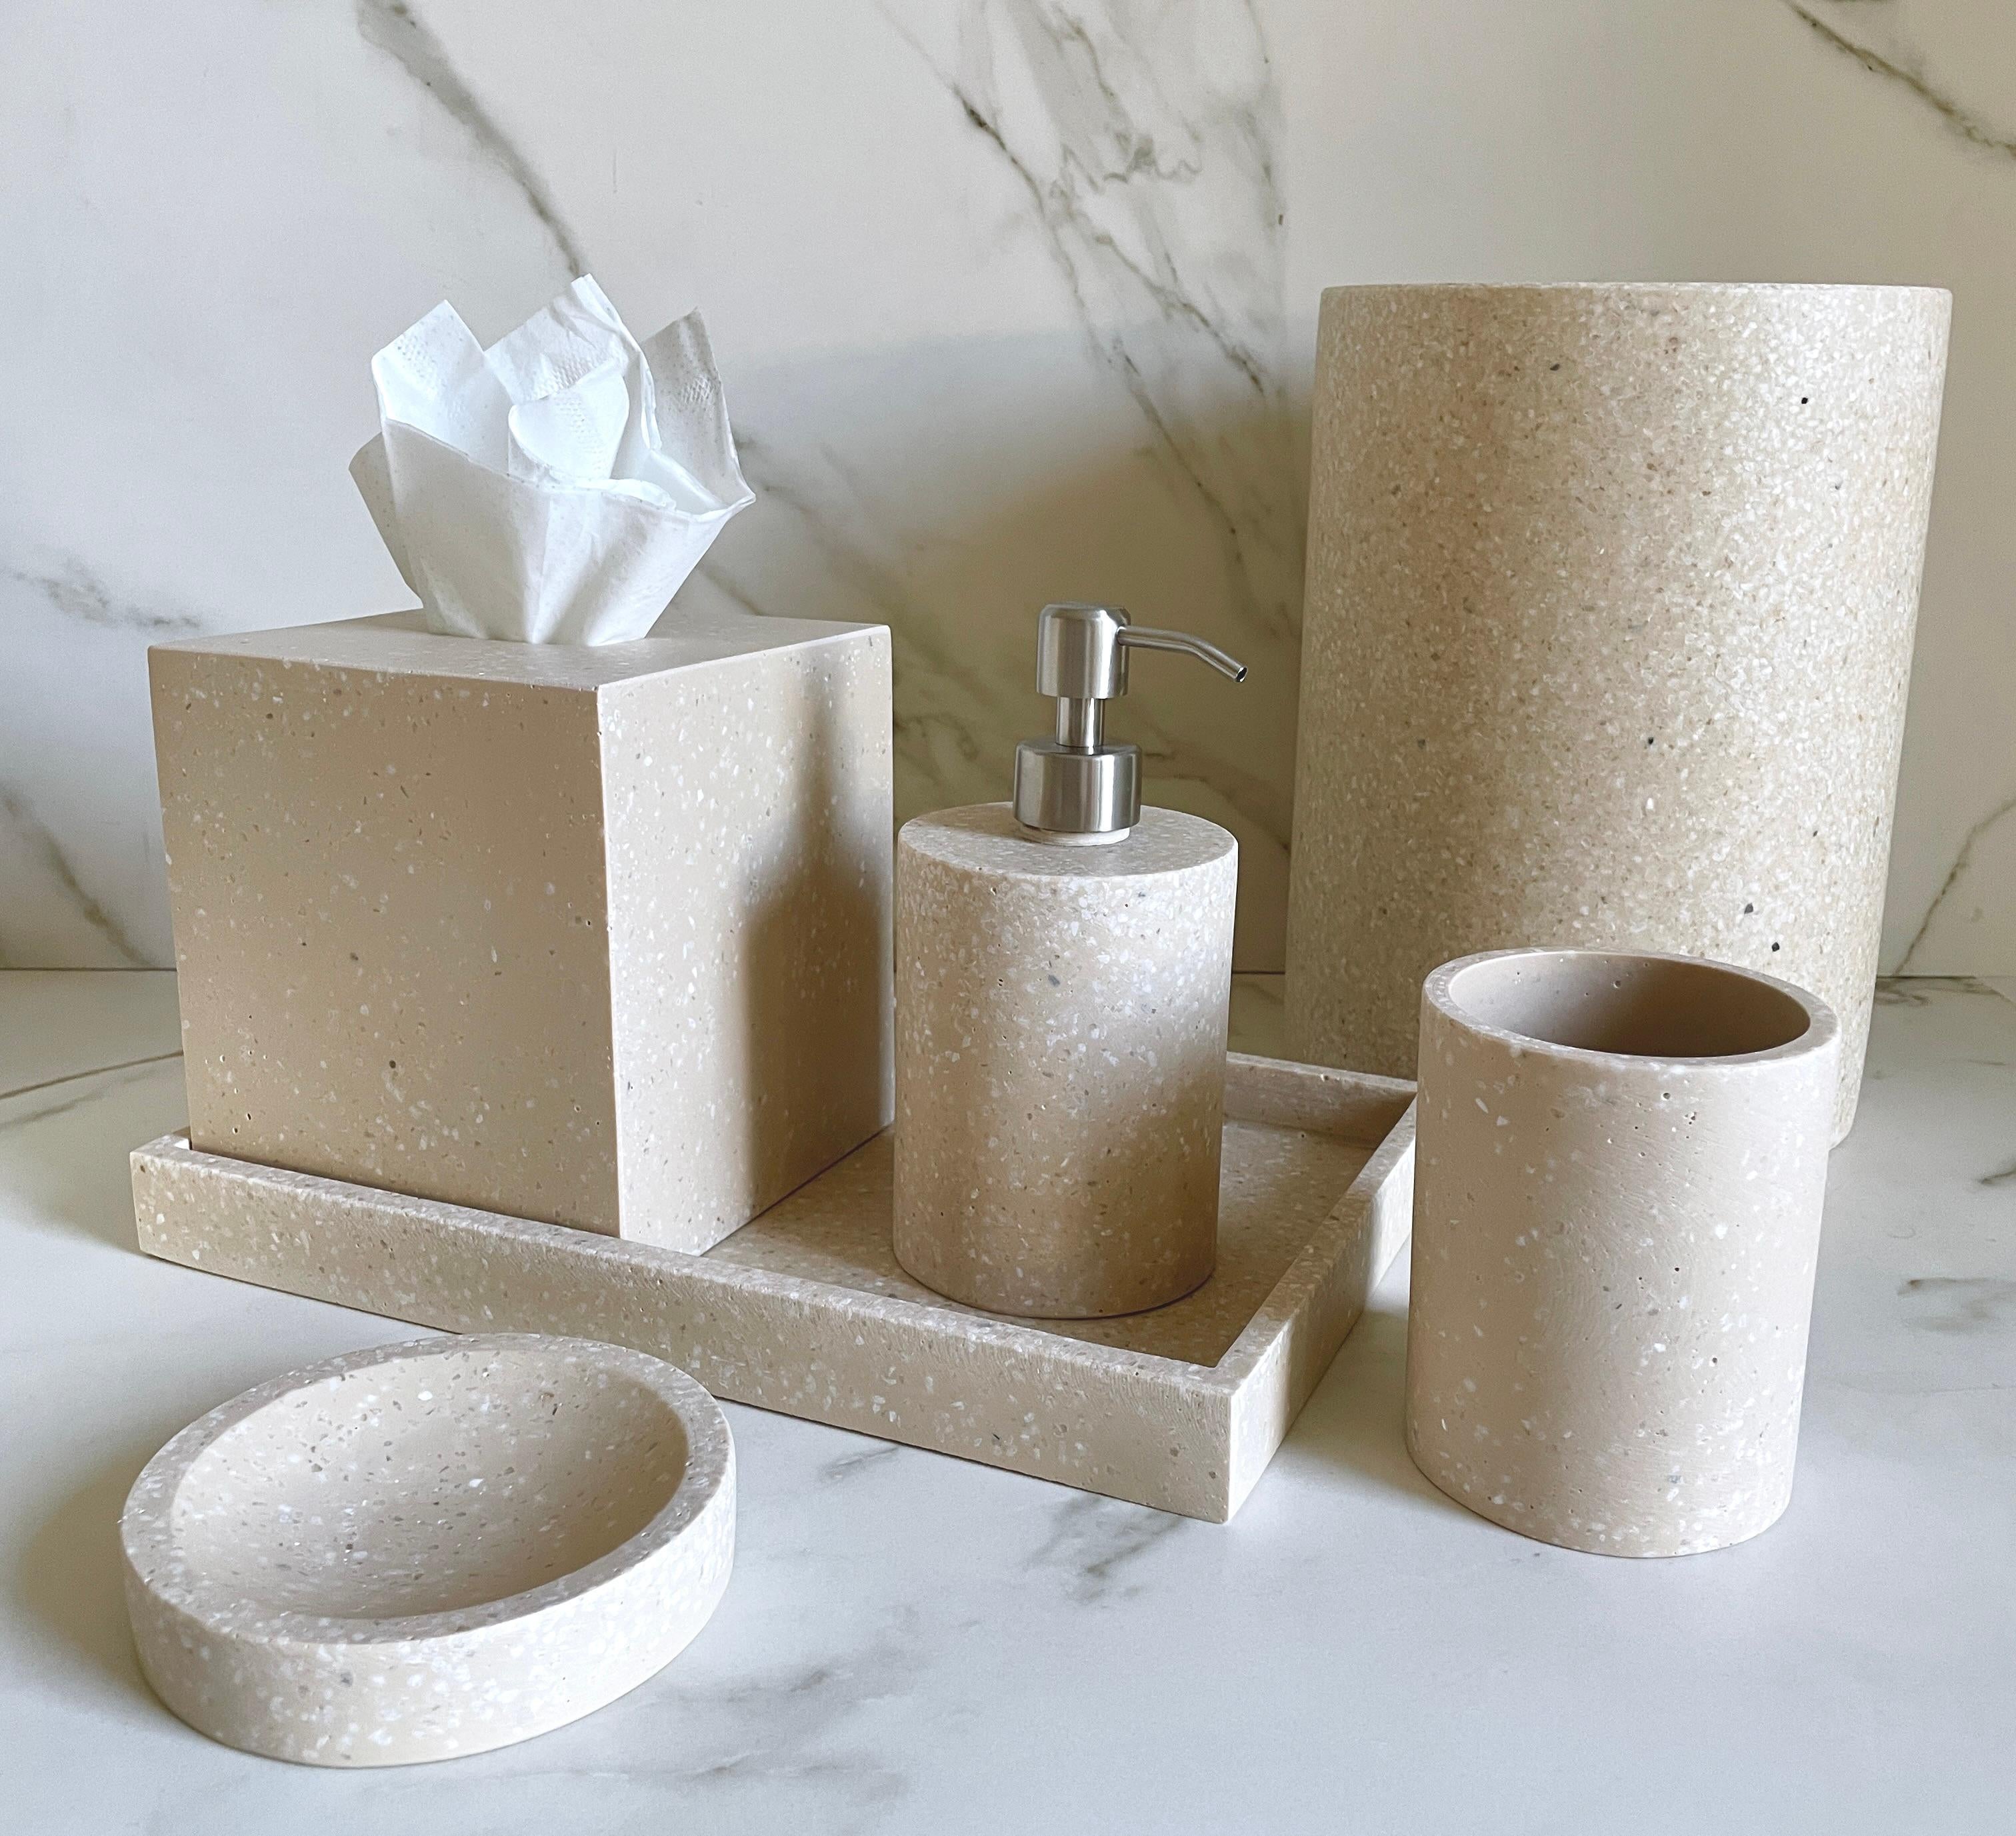 Terrazzo bathroom set handcrafted in resin and marble. This unique mix of materials creates trendy pieces that will add visual interest to your bath space, and the minimalist design brings modern touch to any space. This set includes everything you